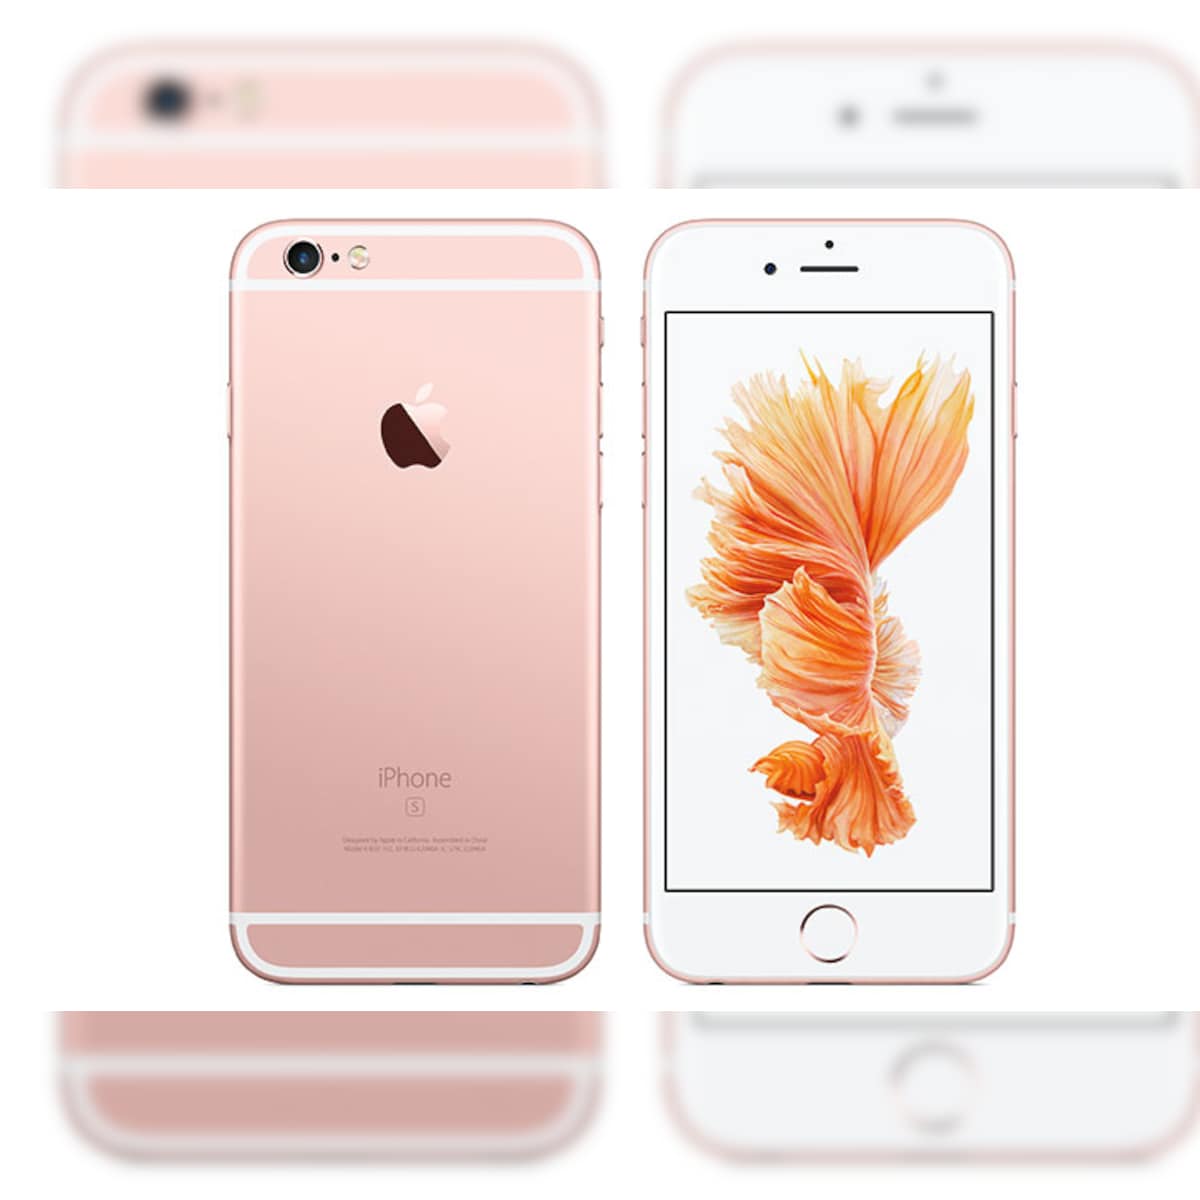 Apple iPhone 6s, iPhone 6s Plus: things new the latest iPhones